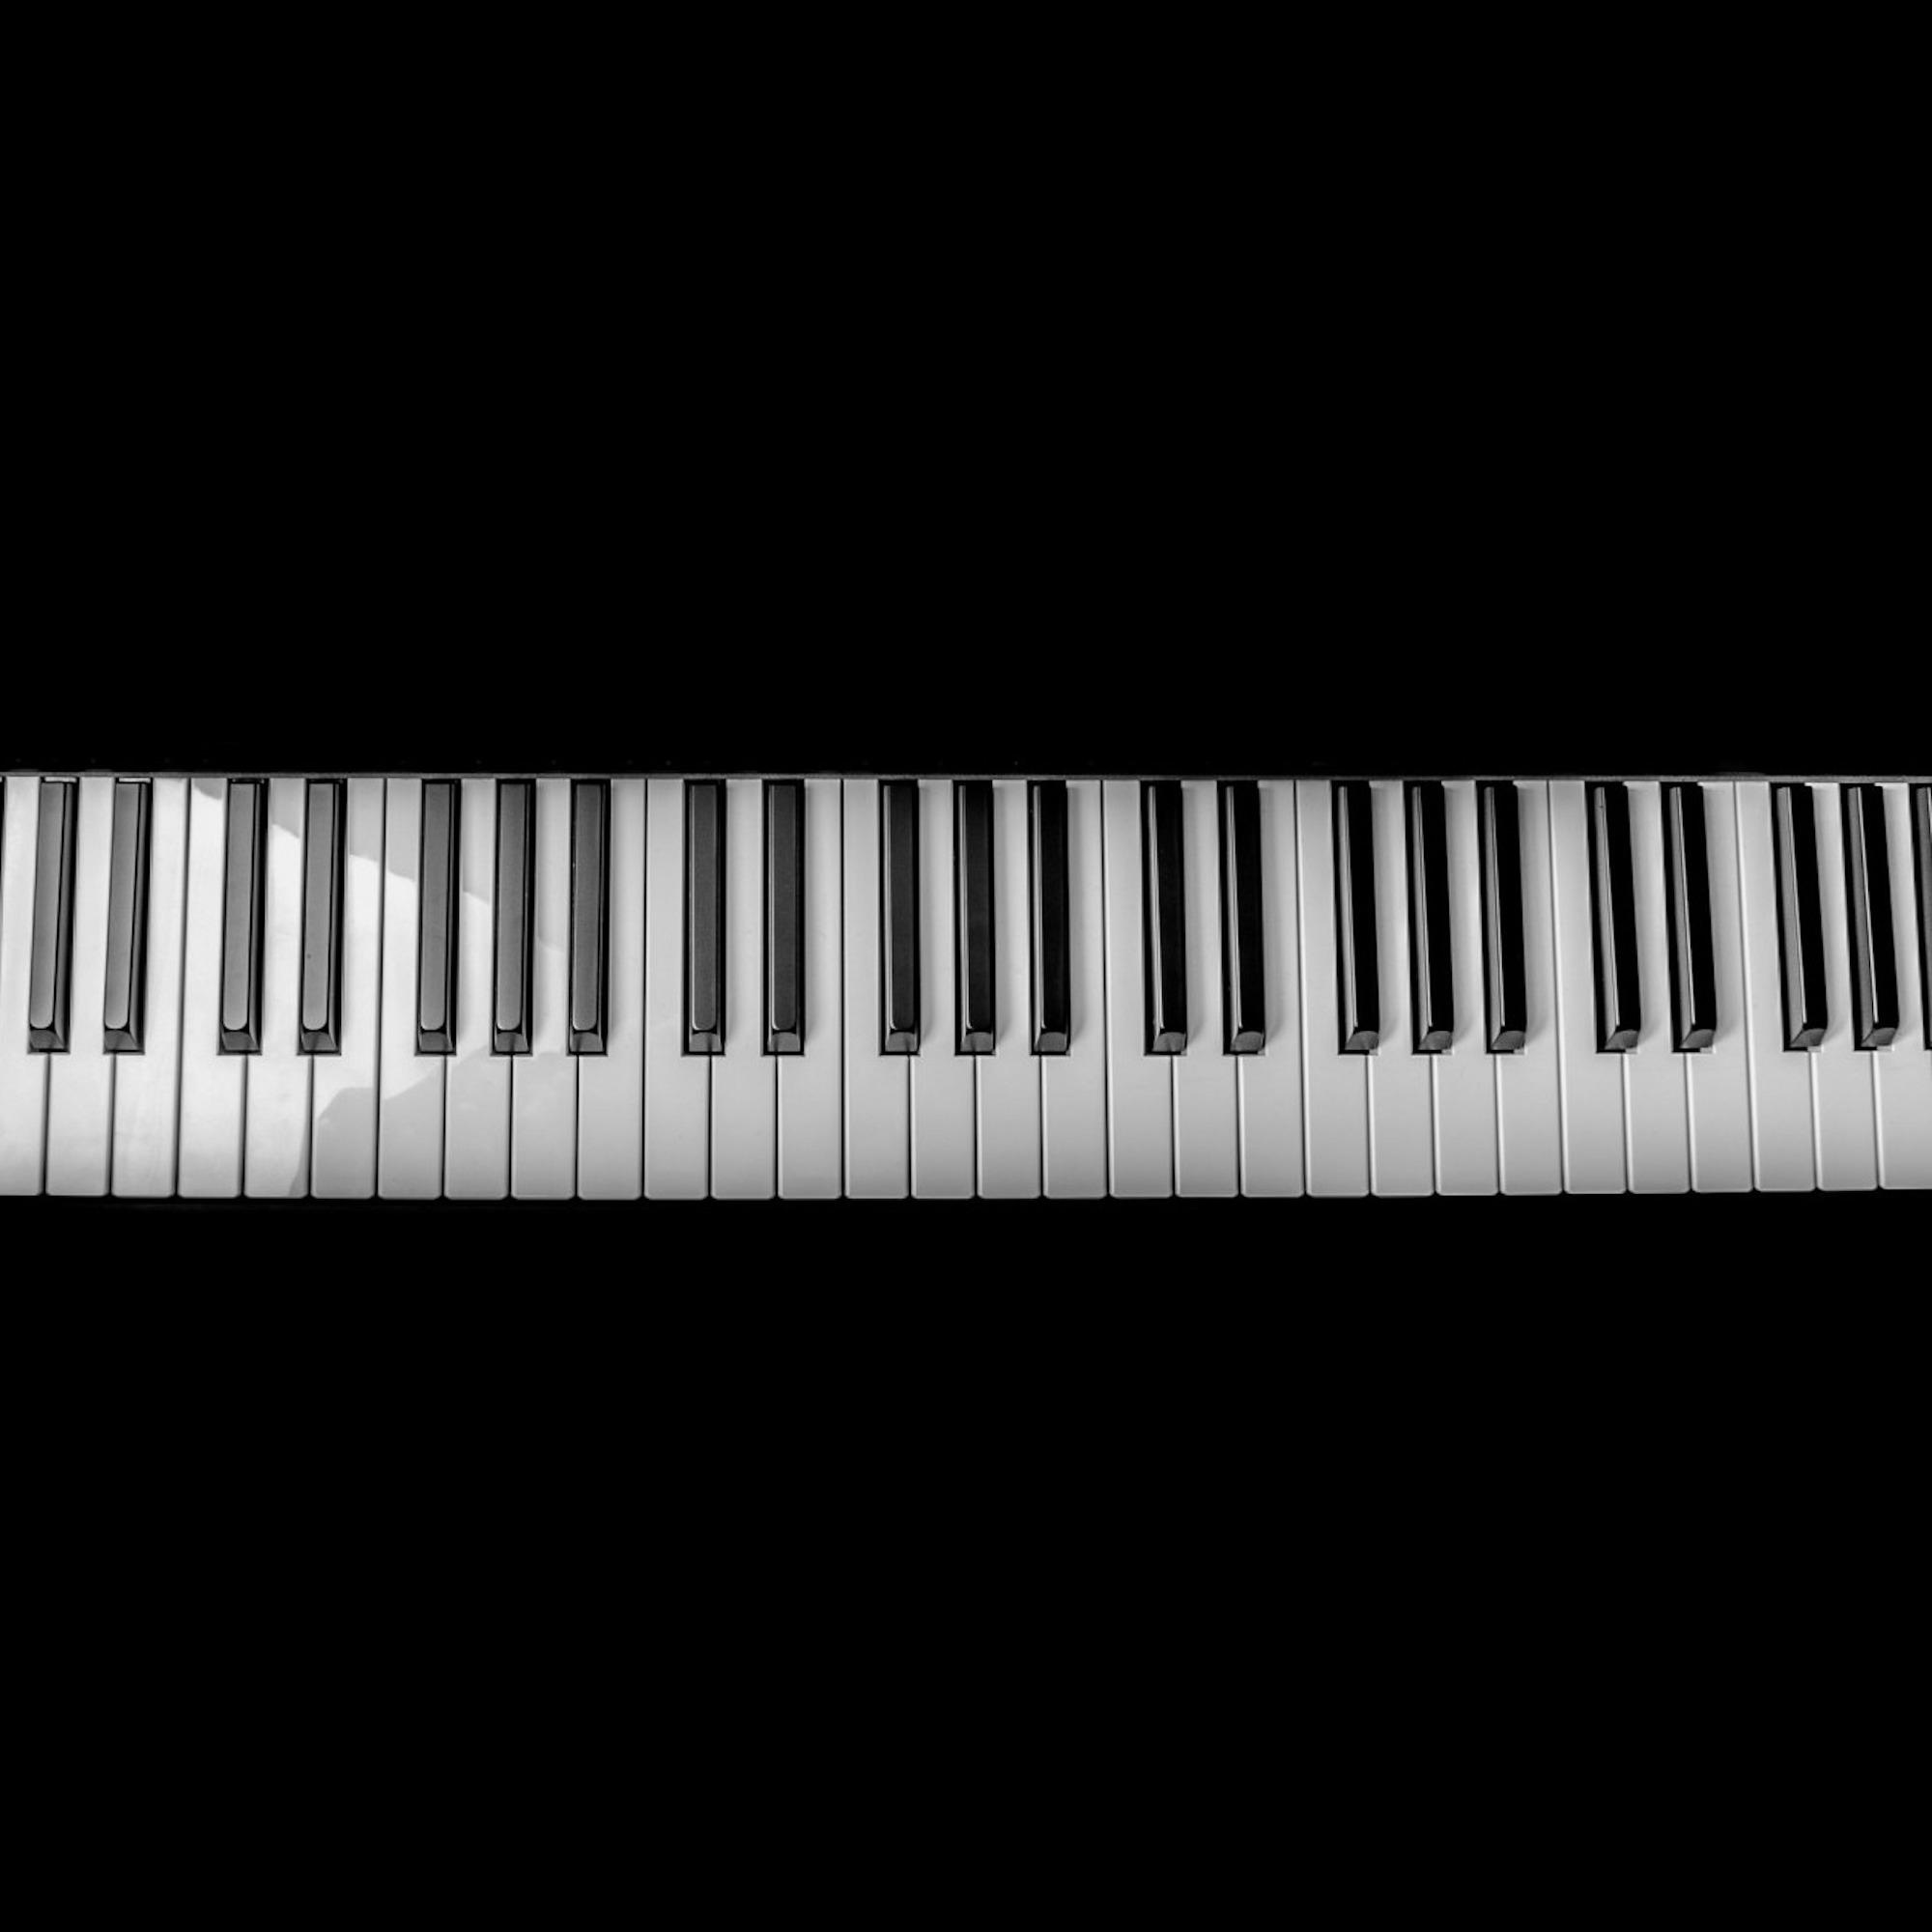 20 Soothing, Beautiful Piano Pieces - Absolutely Pure, Deep and Unforgettable Modern Classic Melodies